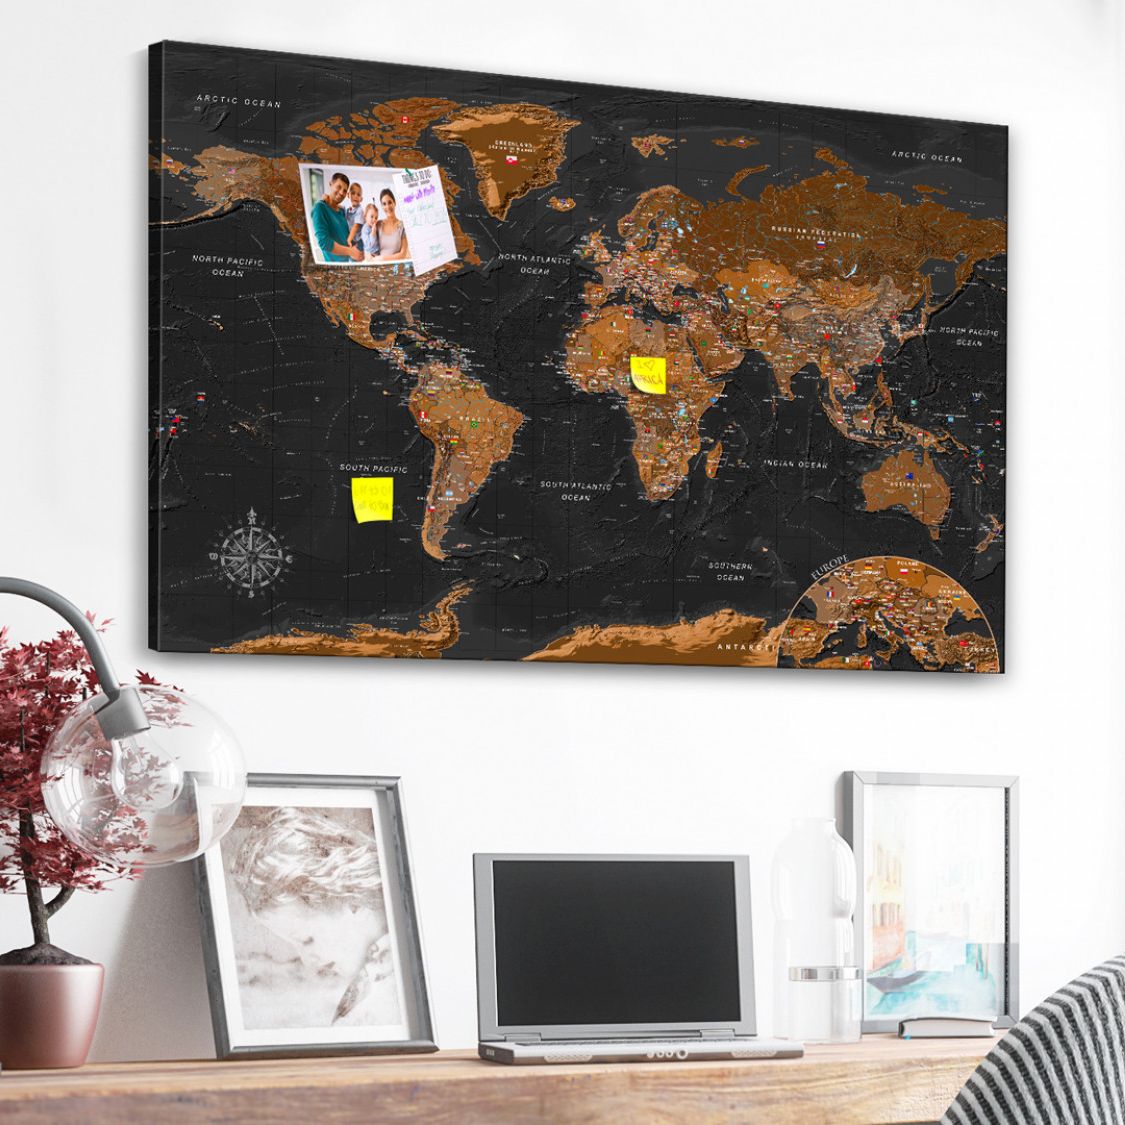 a cork pin board  on top of a desk with a world map in Black and brown design, you can also see some notes and an image pinned in the corkboard